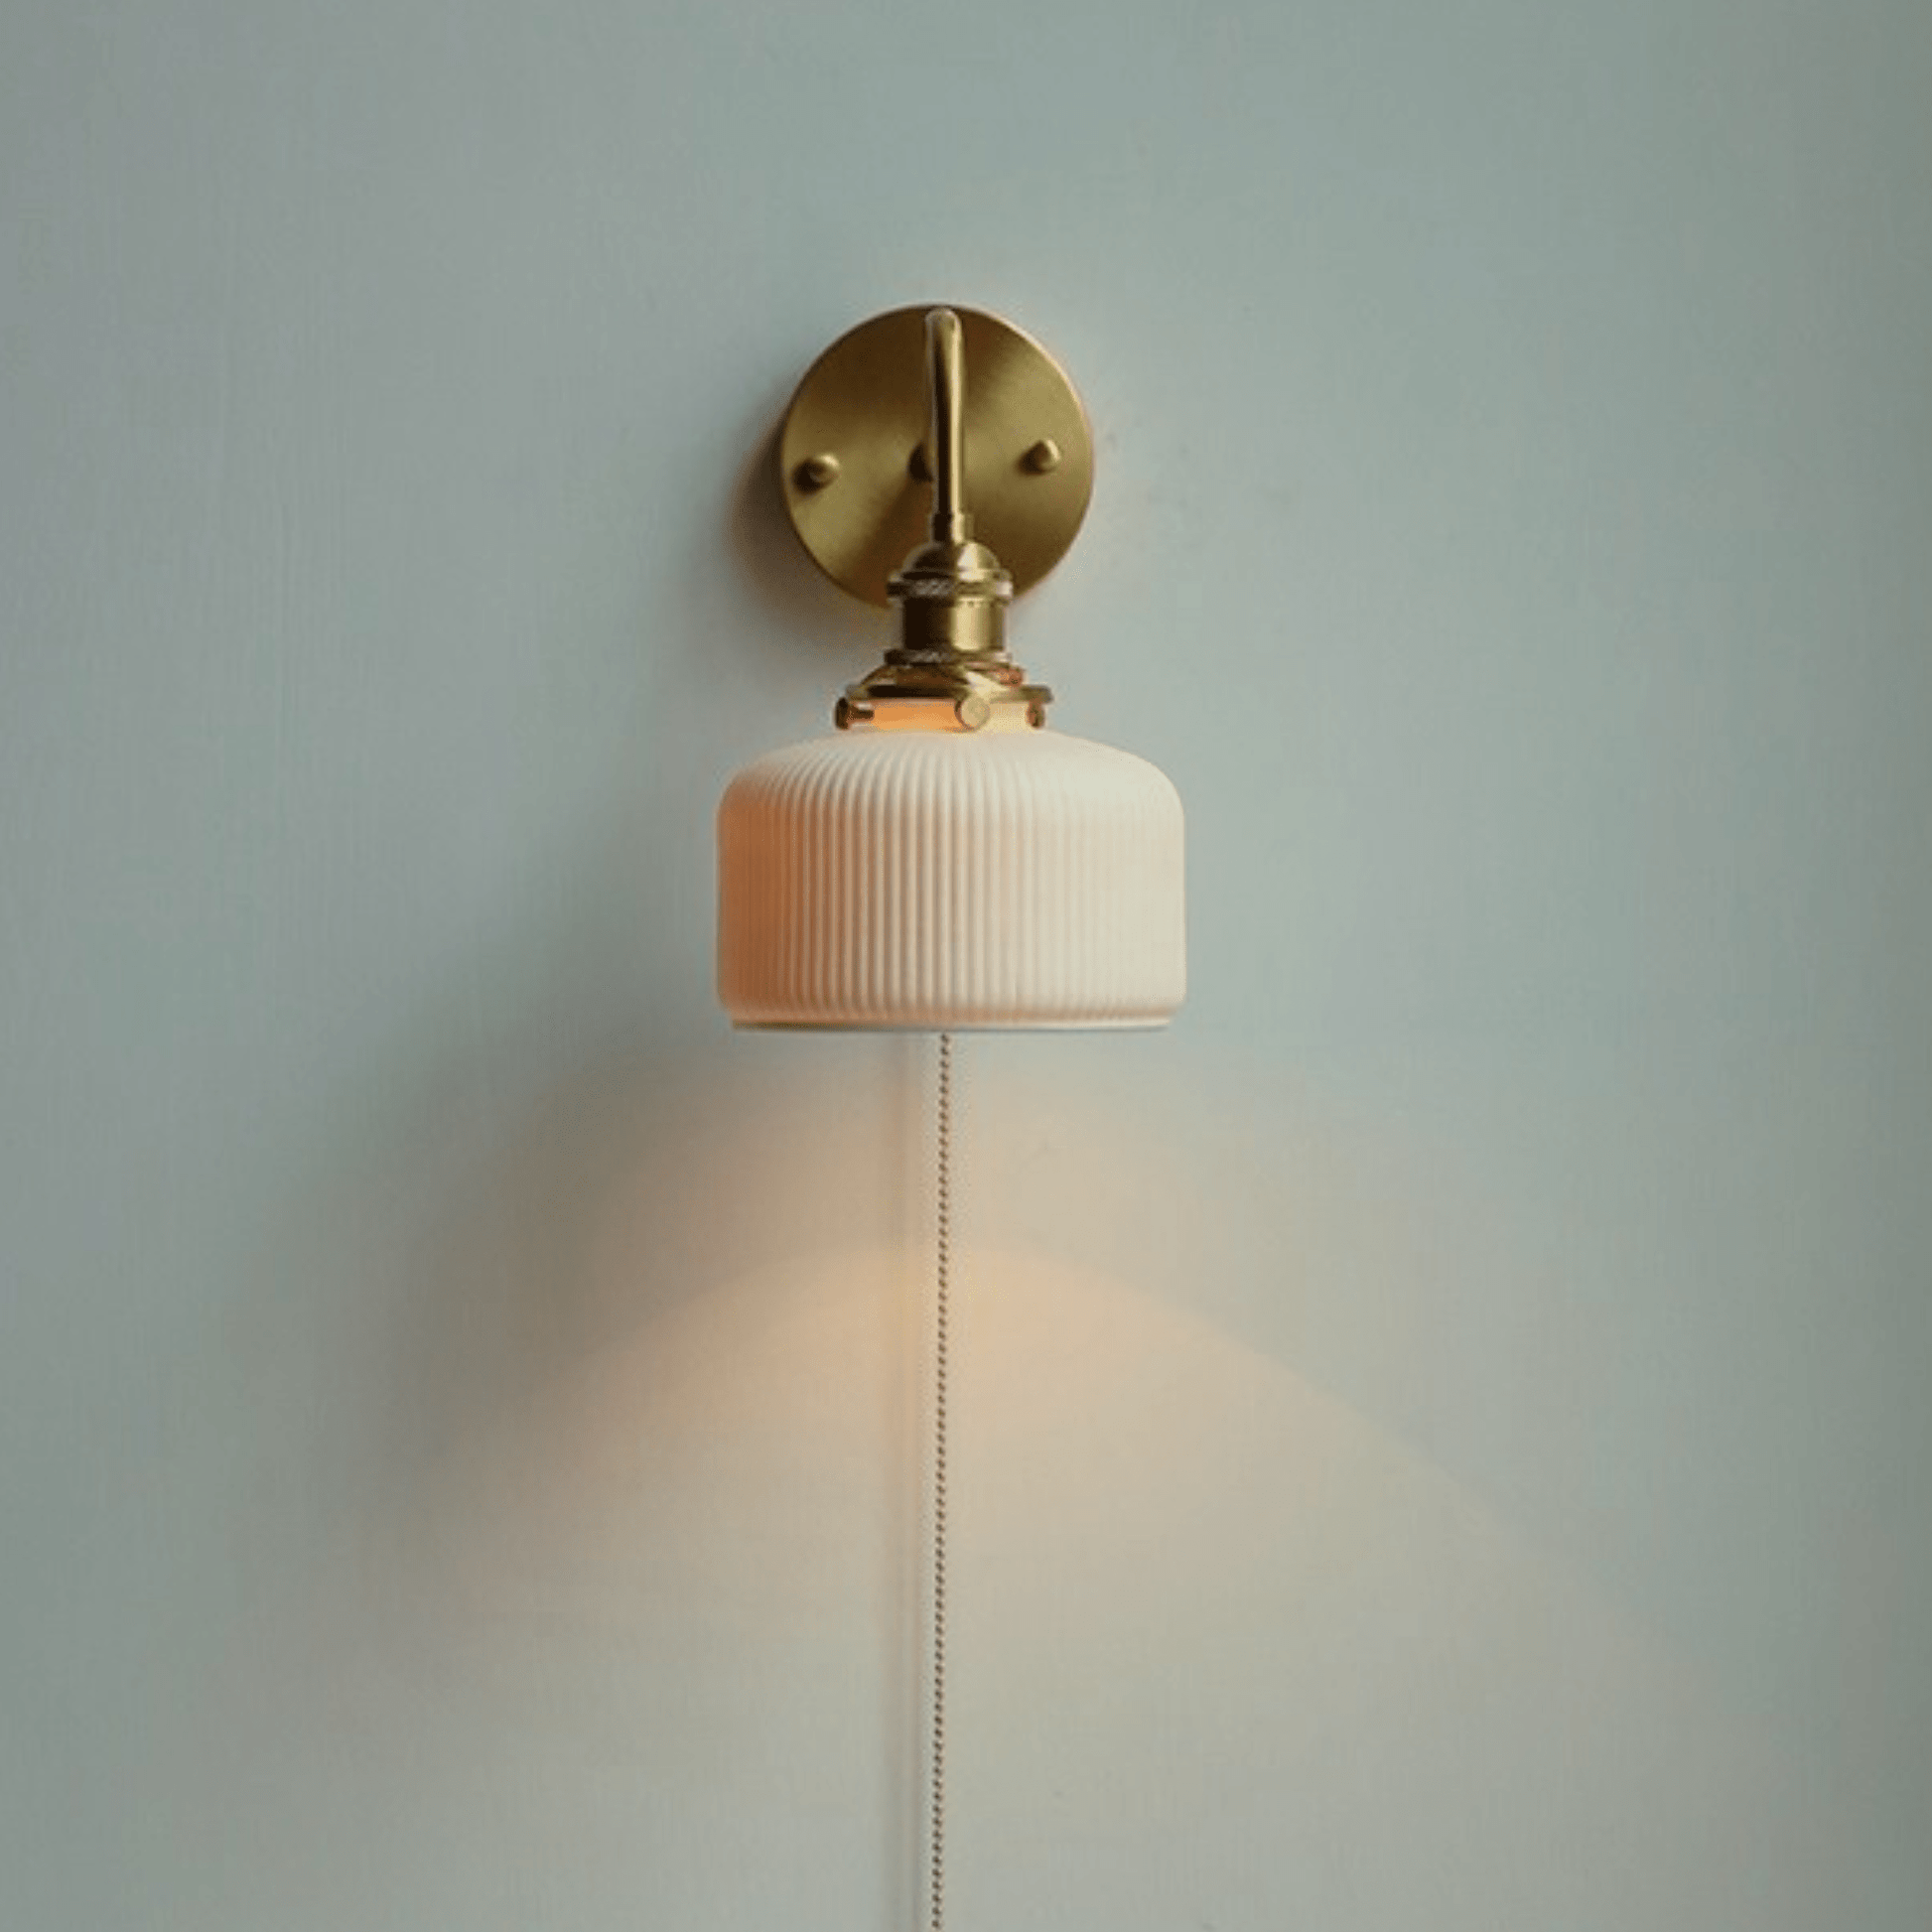 White Ceramic Wall Sconce with Pull Chain Switch – Decluttered Homes